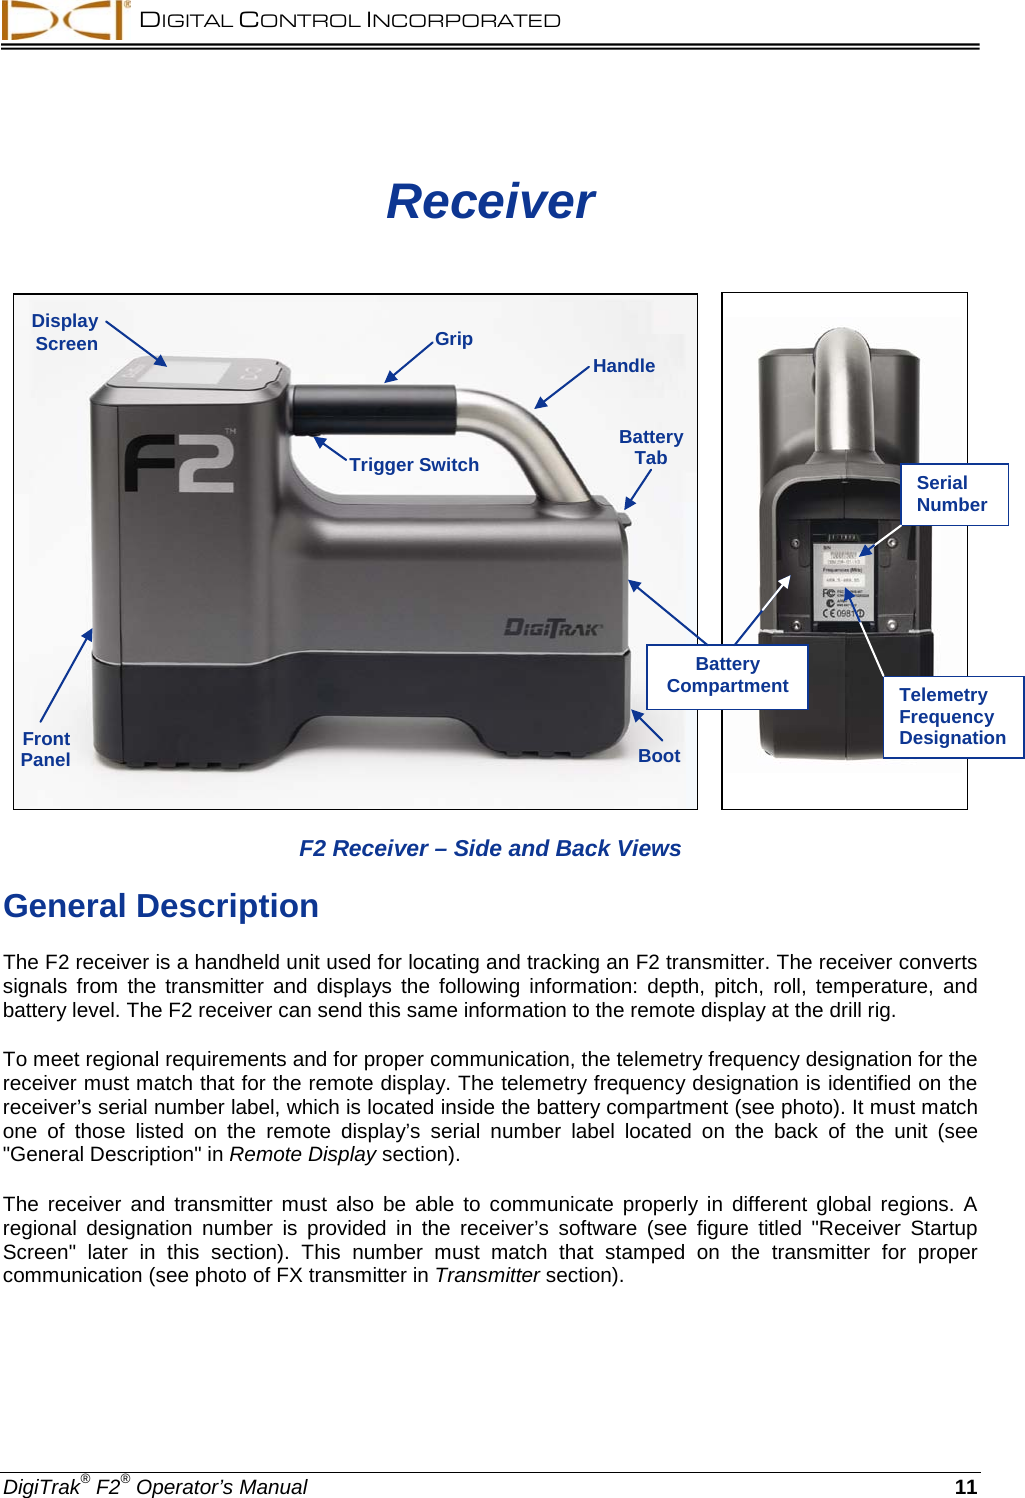  DIGITAL CONTROL INCORPORATED  DigiTrak® F2® Operator’s Manual 11 Receiver        F2 Receiver – Side and Back Views General Description The F2 receiver is a handheld unit used for locating and tracking an F2 transmitter. The receiver converts signals from the transmitter and displays the following information: depth, pitch, roll, temperature, and battery level. The F2 receiver can send this same information to the remote display at the drill rig. To meet regional requirements and for proper communication, the telemetry frequency designation for the receiver must match that for the remote display. The telemetry frequency designation is identified on the receiver’s serial number label, which is located inside the battery compartment (see photo). It must match one of those listed on the remote display’s serial number label  located on the back of the unit (see &quot;General Description&quot; in Remote Display section). The receiver and transmitter must also be able to communicate properly in different global regions. A regional  designation number is provided in the receiver’s software (see figure titled &quot;Receiver Startup Screen&quot;  later in this section). This number must match that stamped on the transmitter for proper communication (see photo of FX transmitter in Transmitter section). Trigger Switch Front Panel Boot Battery Tab Display Screen Handle Grip Serial Number Telemetry Frequency Designation Battery Compartment 